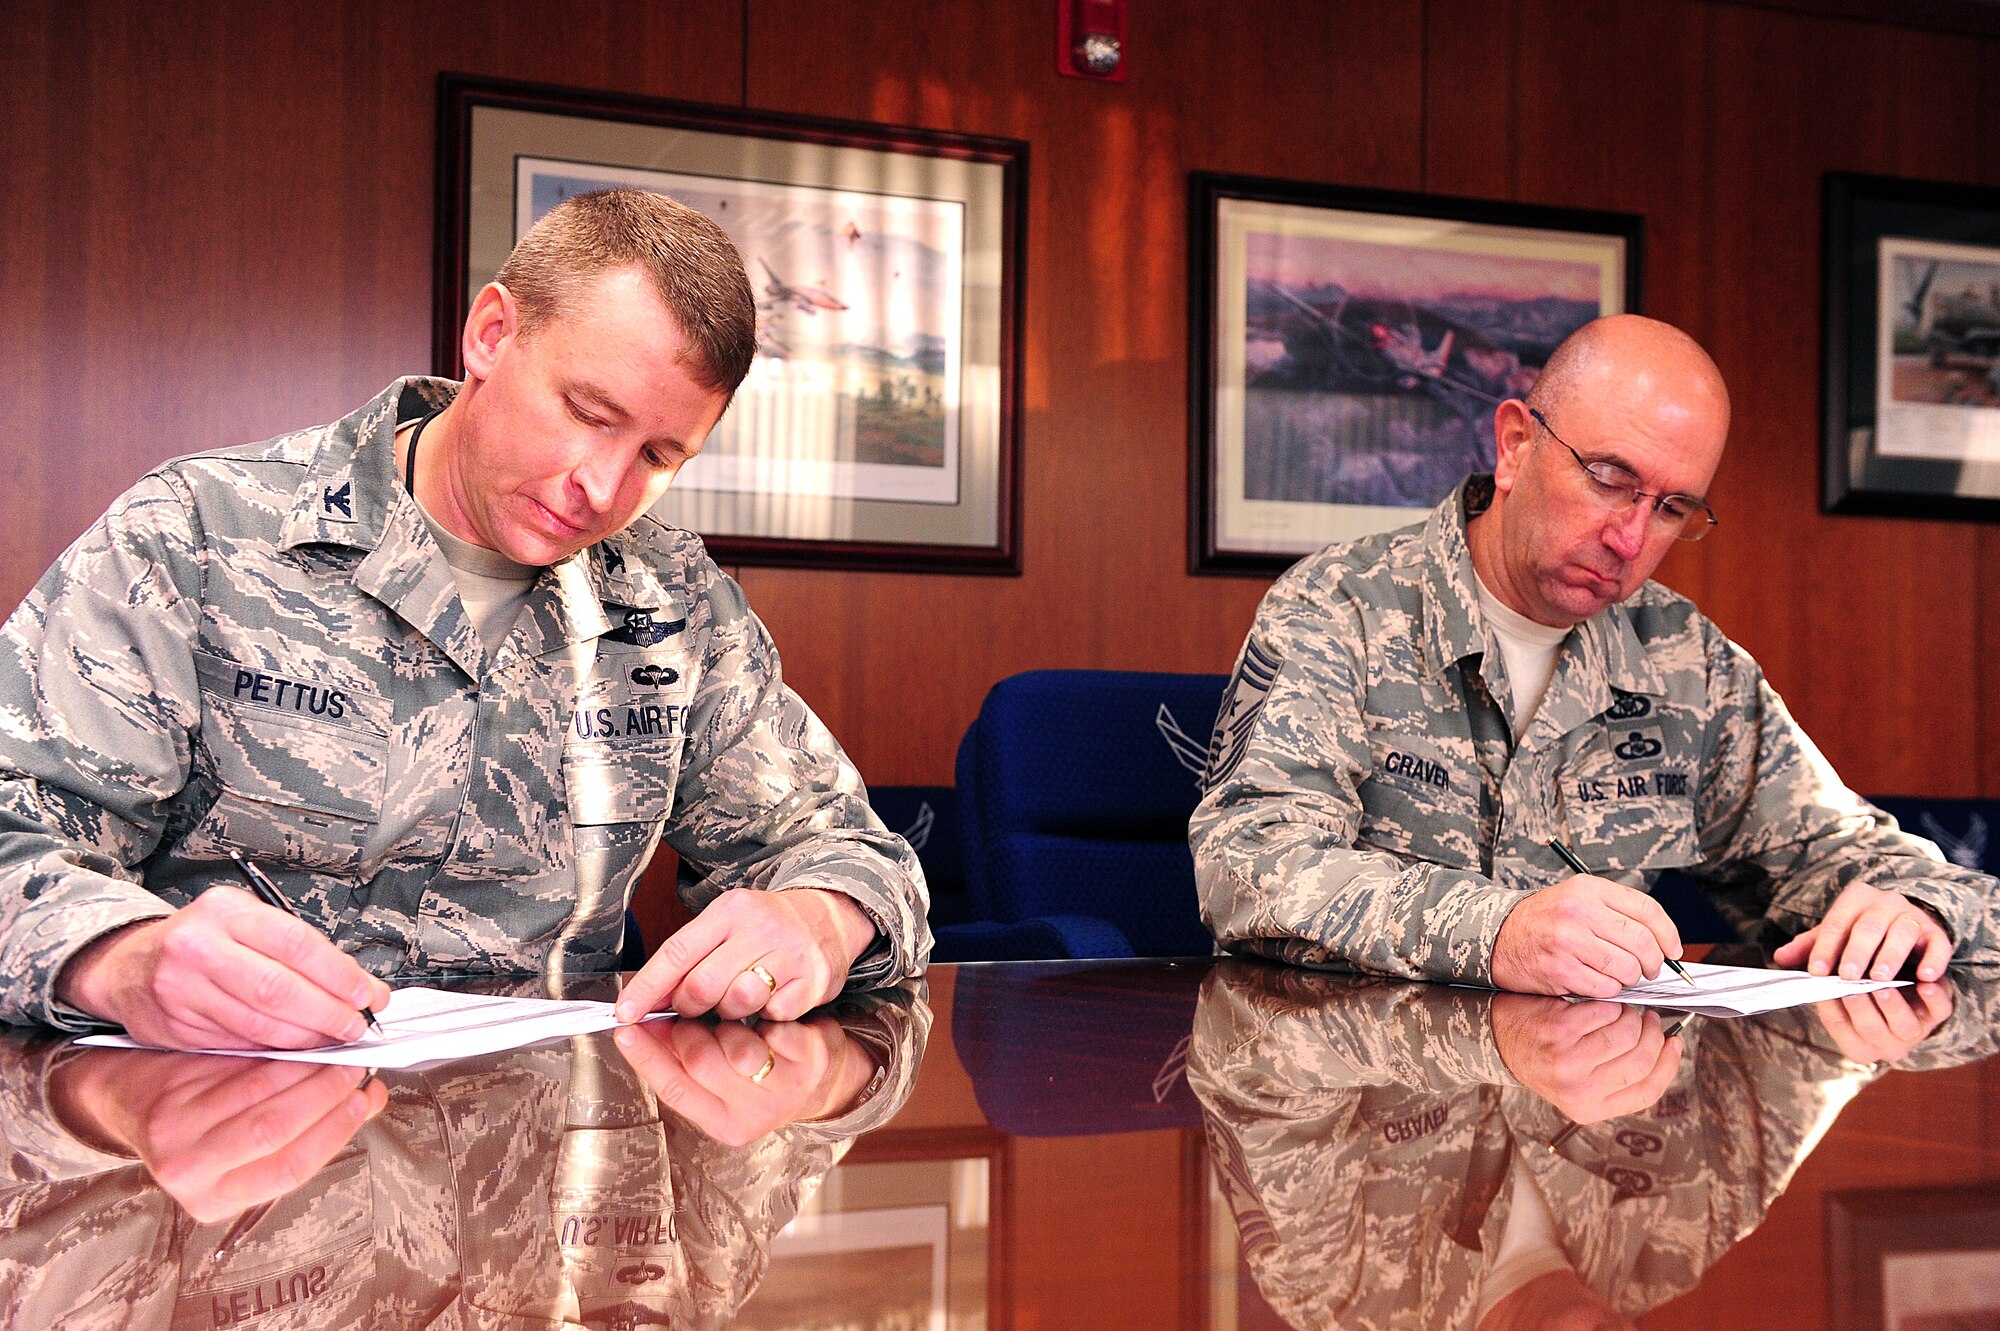 U.S. Air Force Col. Lamar Pettus, 4th Fighter Wing vice commander, and Chief Master Sgt. Jeffrey Craver, 4th FW command chief, sign their pledge forms to kick off the annual Combined Federal Campaign (CFC) at Seymour Johnson Air Force Base, Sept. 23, 2013.  The CFC provides members of Team Seymour the opportunity to donate to more than 20,000 charities.  With the campaign lasting until Oct. 28, the 4th FW goal aims to raise $230,000 this year.  (U.S. Air Force photo by Airman 1st Class Brittain Crolley)